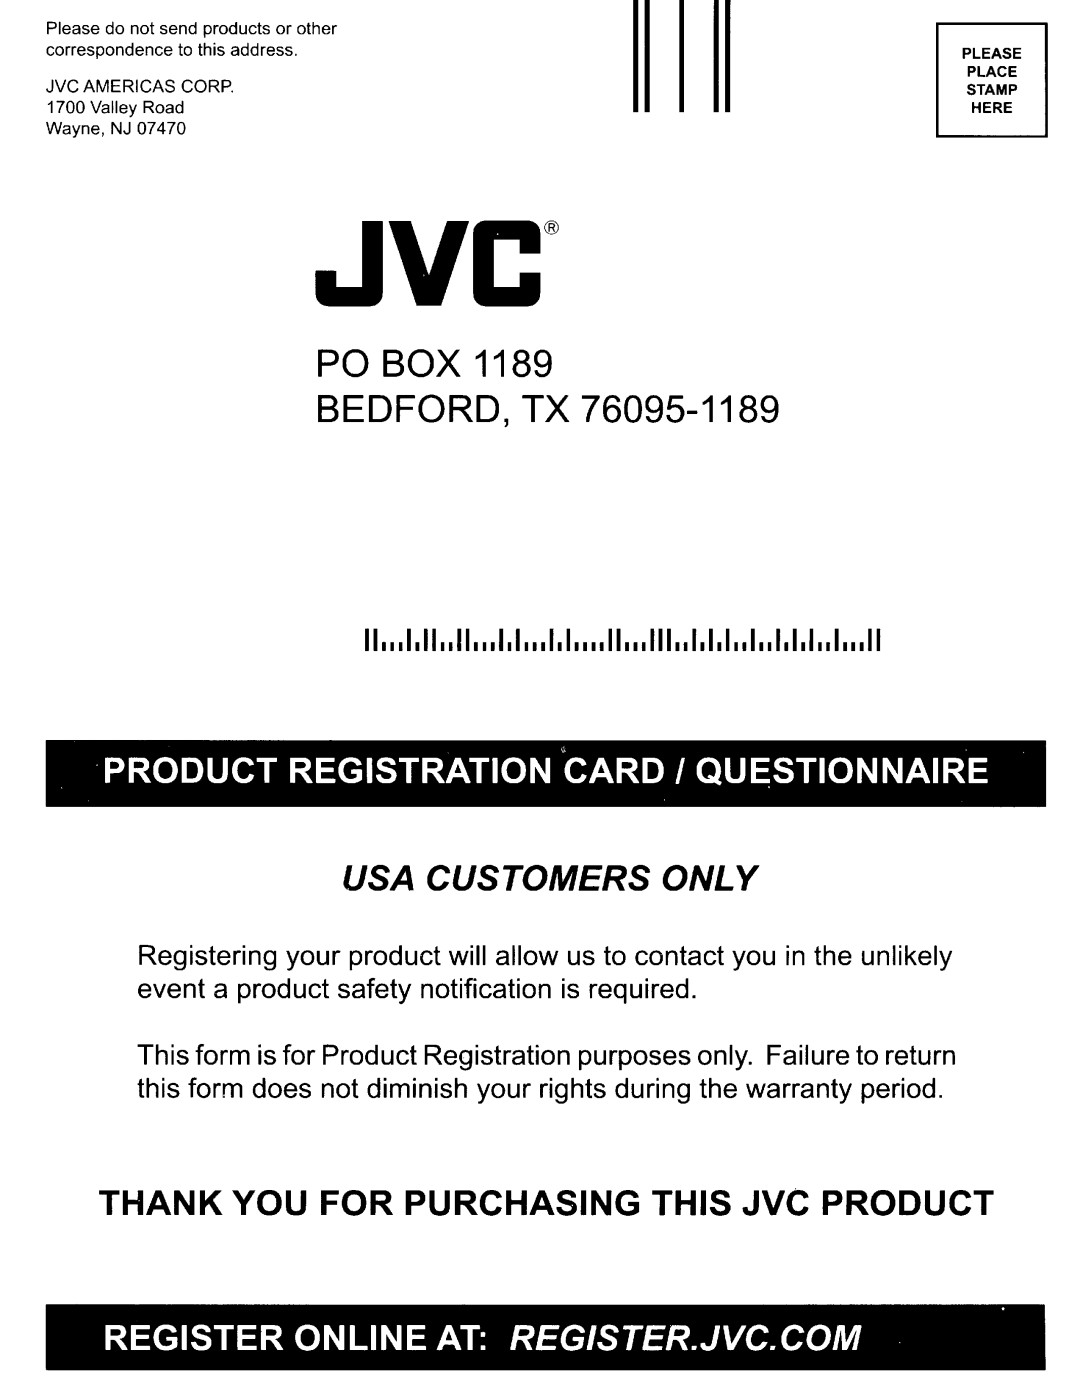 JVC KW-AVX838 Po Box Bedford, Tx, Productregistration Card I Qu~Stionnaire, Thank You For Purchasing This Jvc Product 